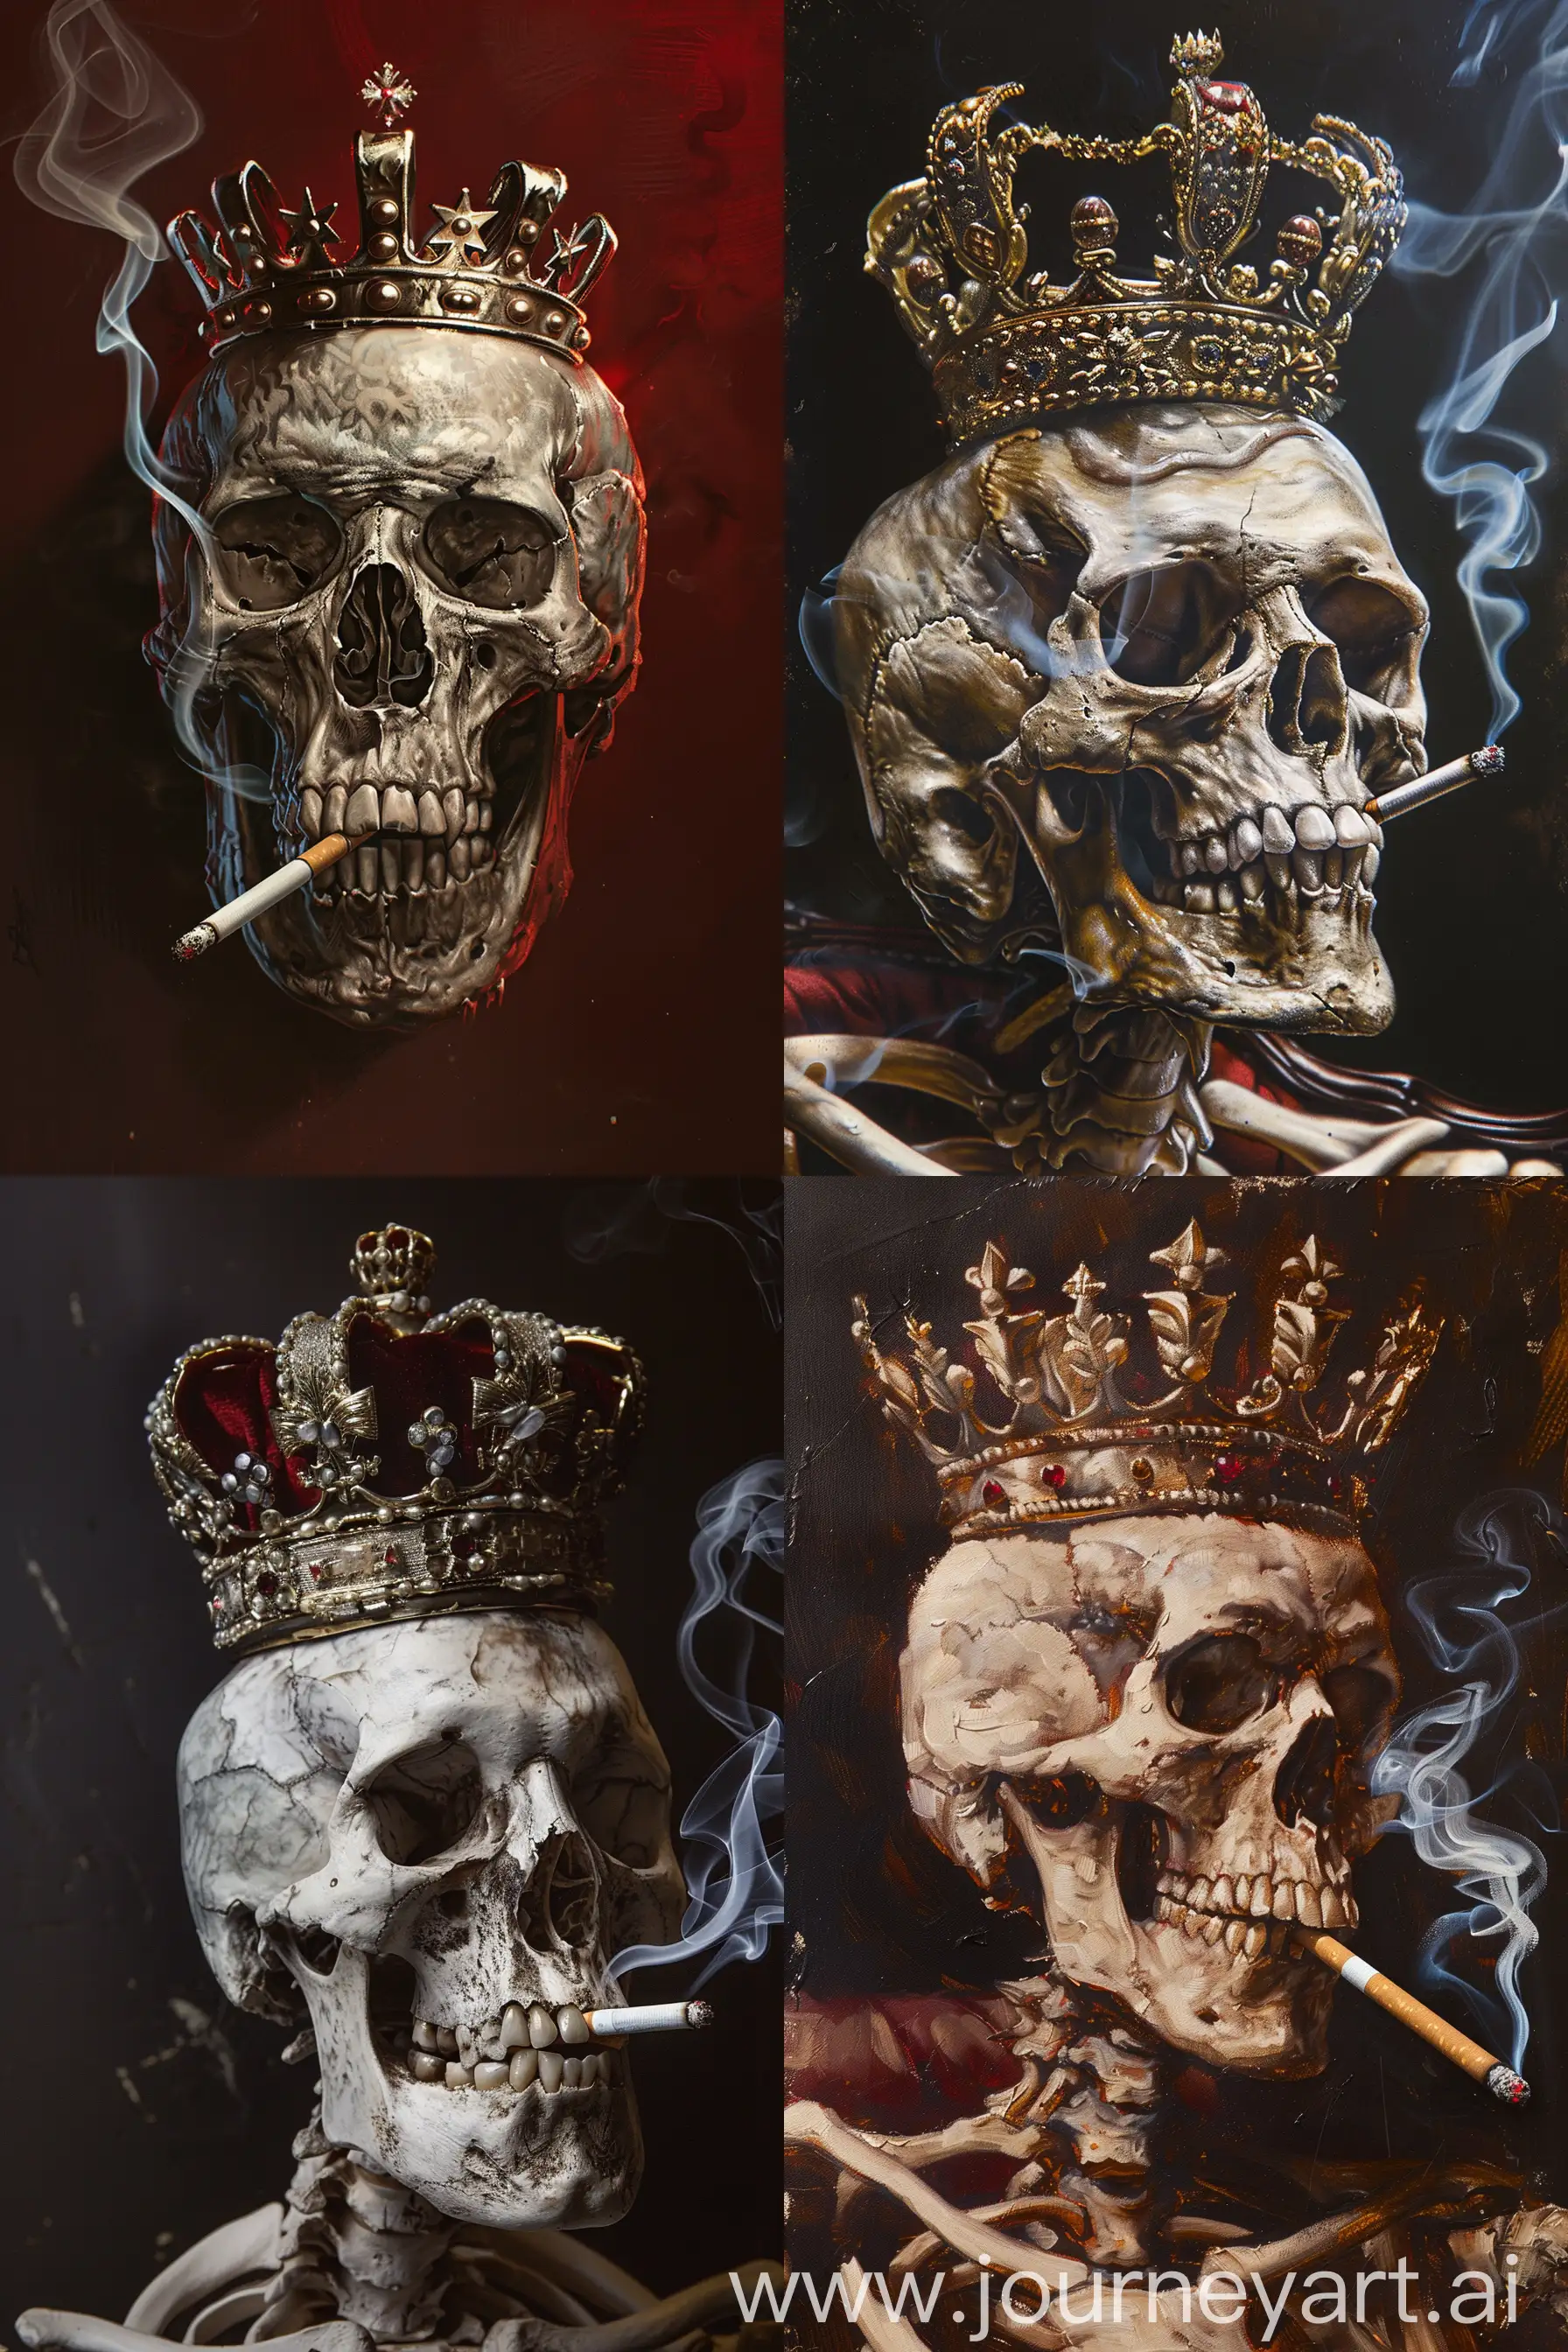  a portrait of the skull of a king with a crown smoking a cigarette by Alec Monopoly --ar 2:3